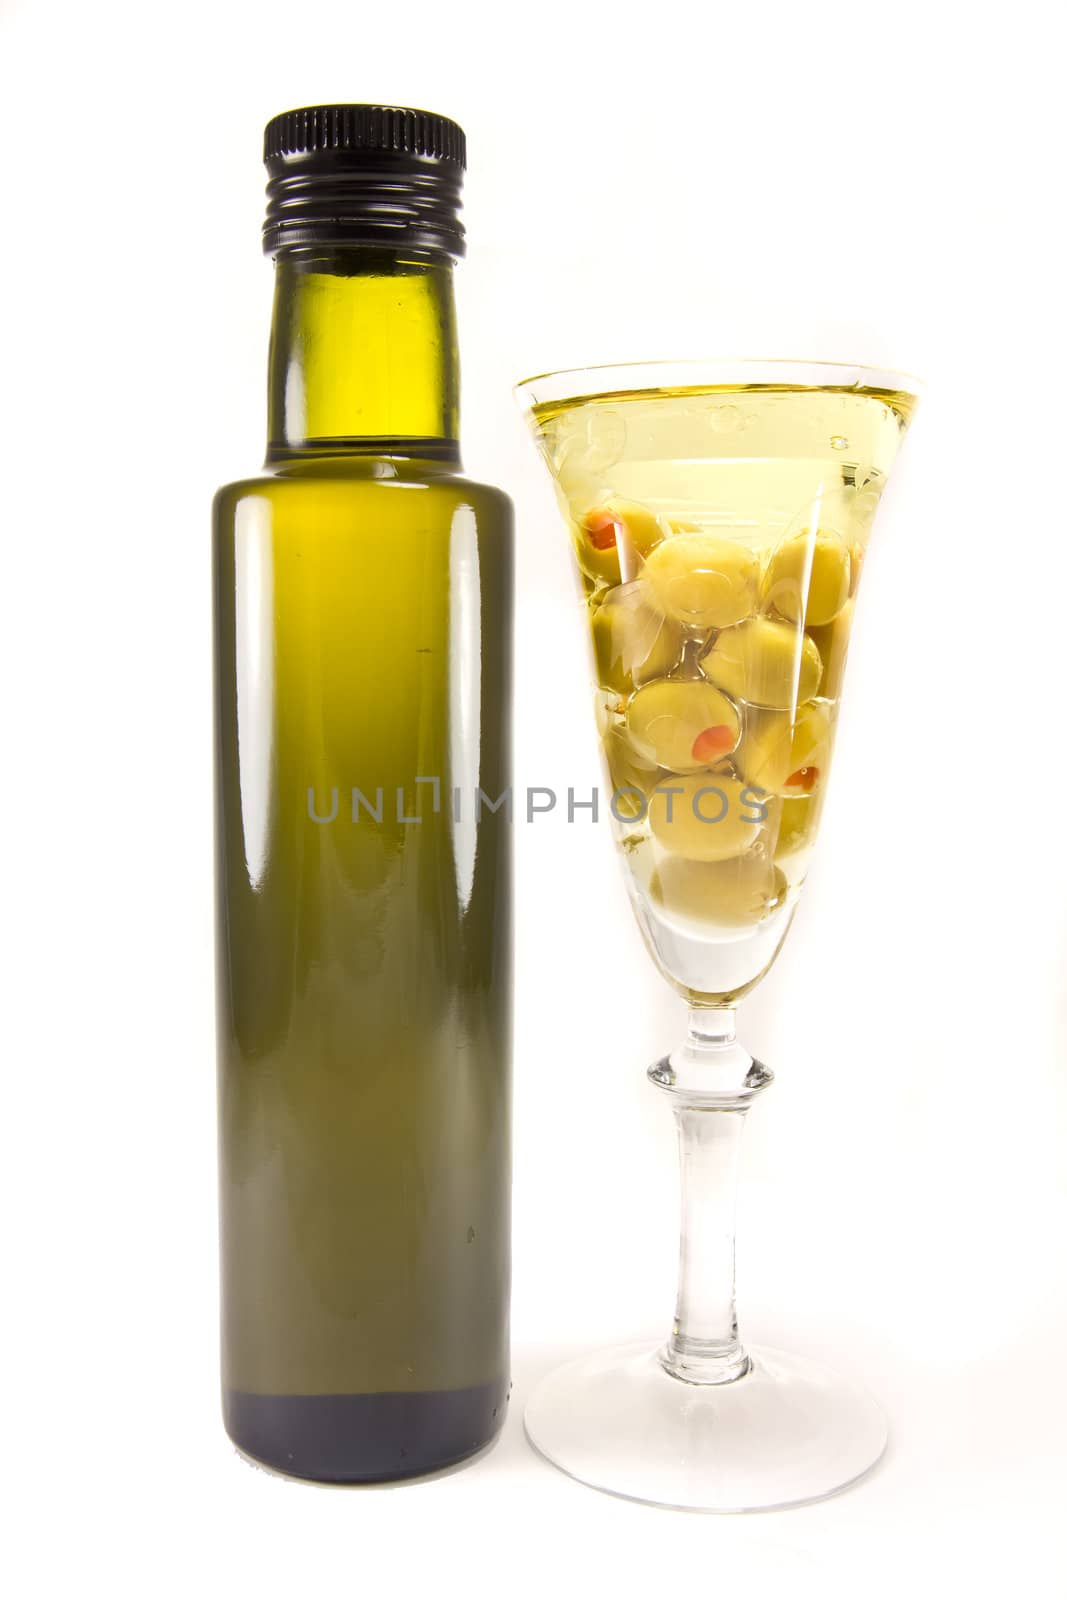 Picture of a bottle of olive oil and olives in a wine glass